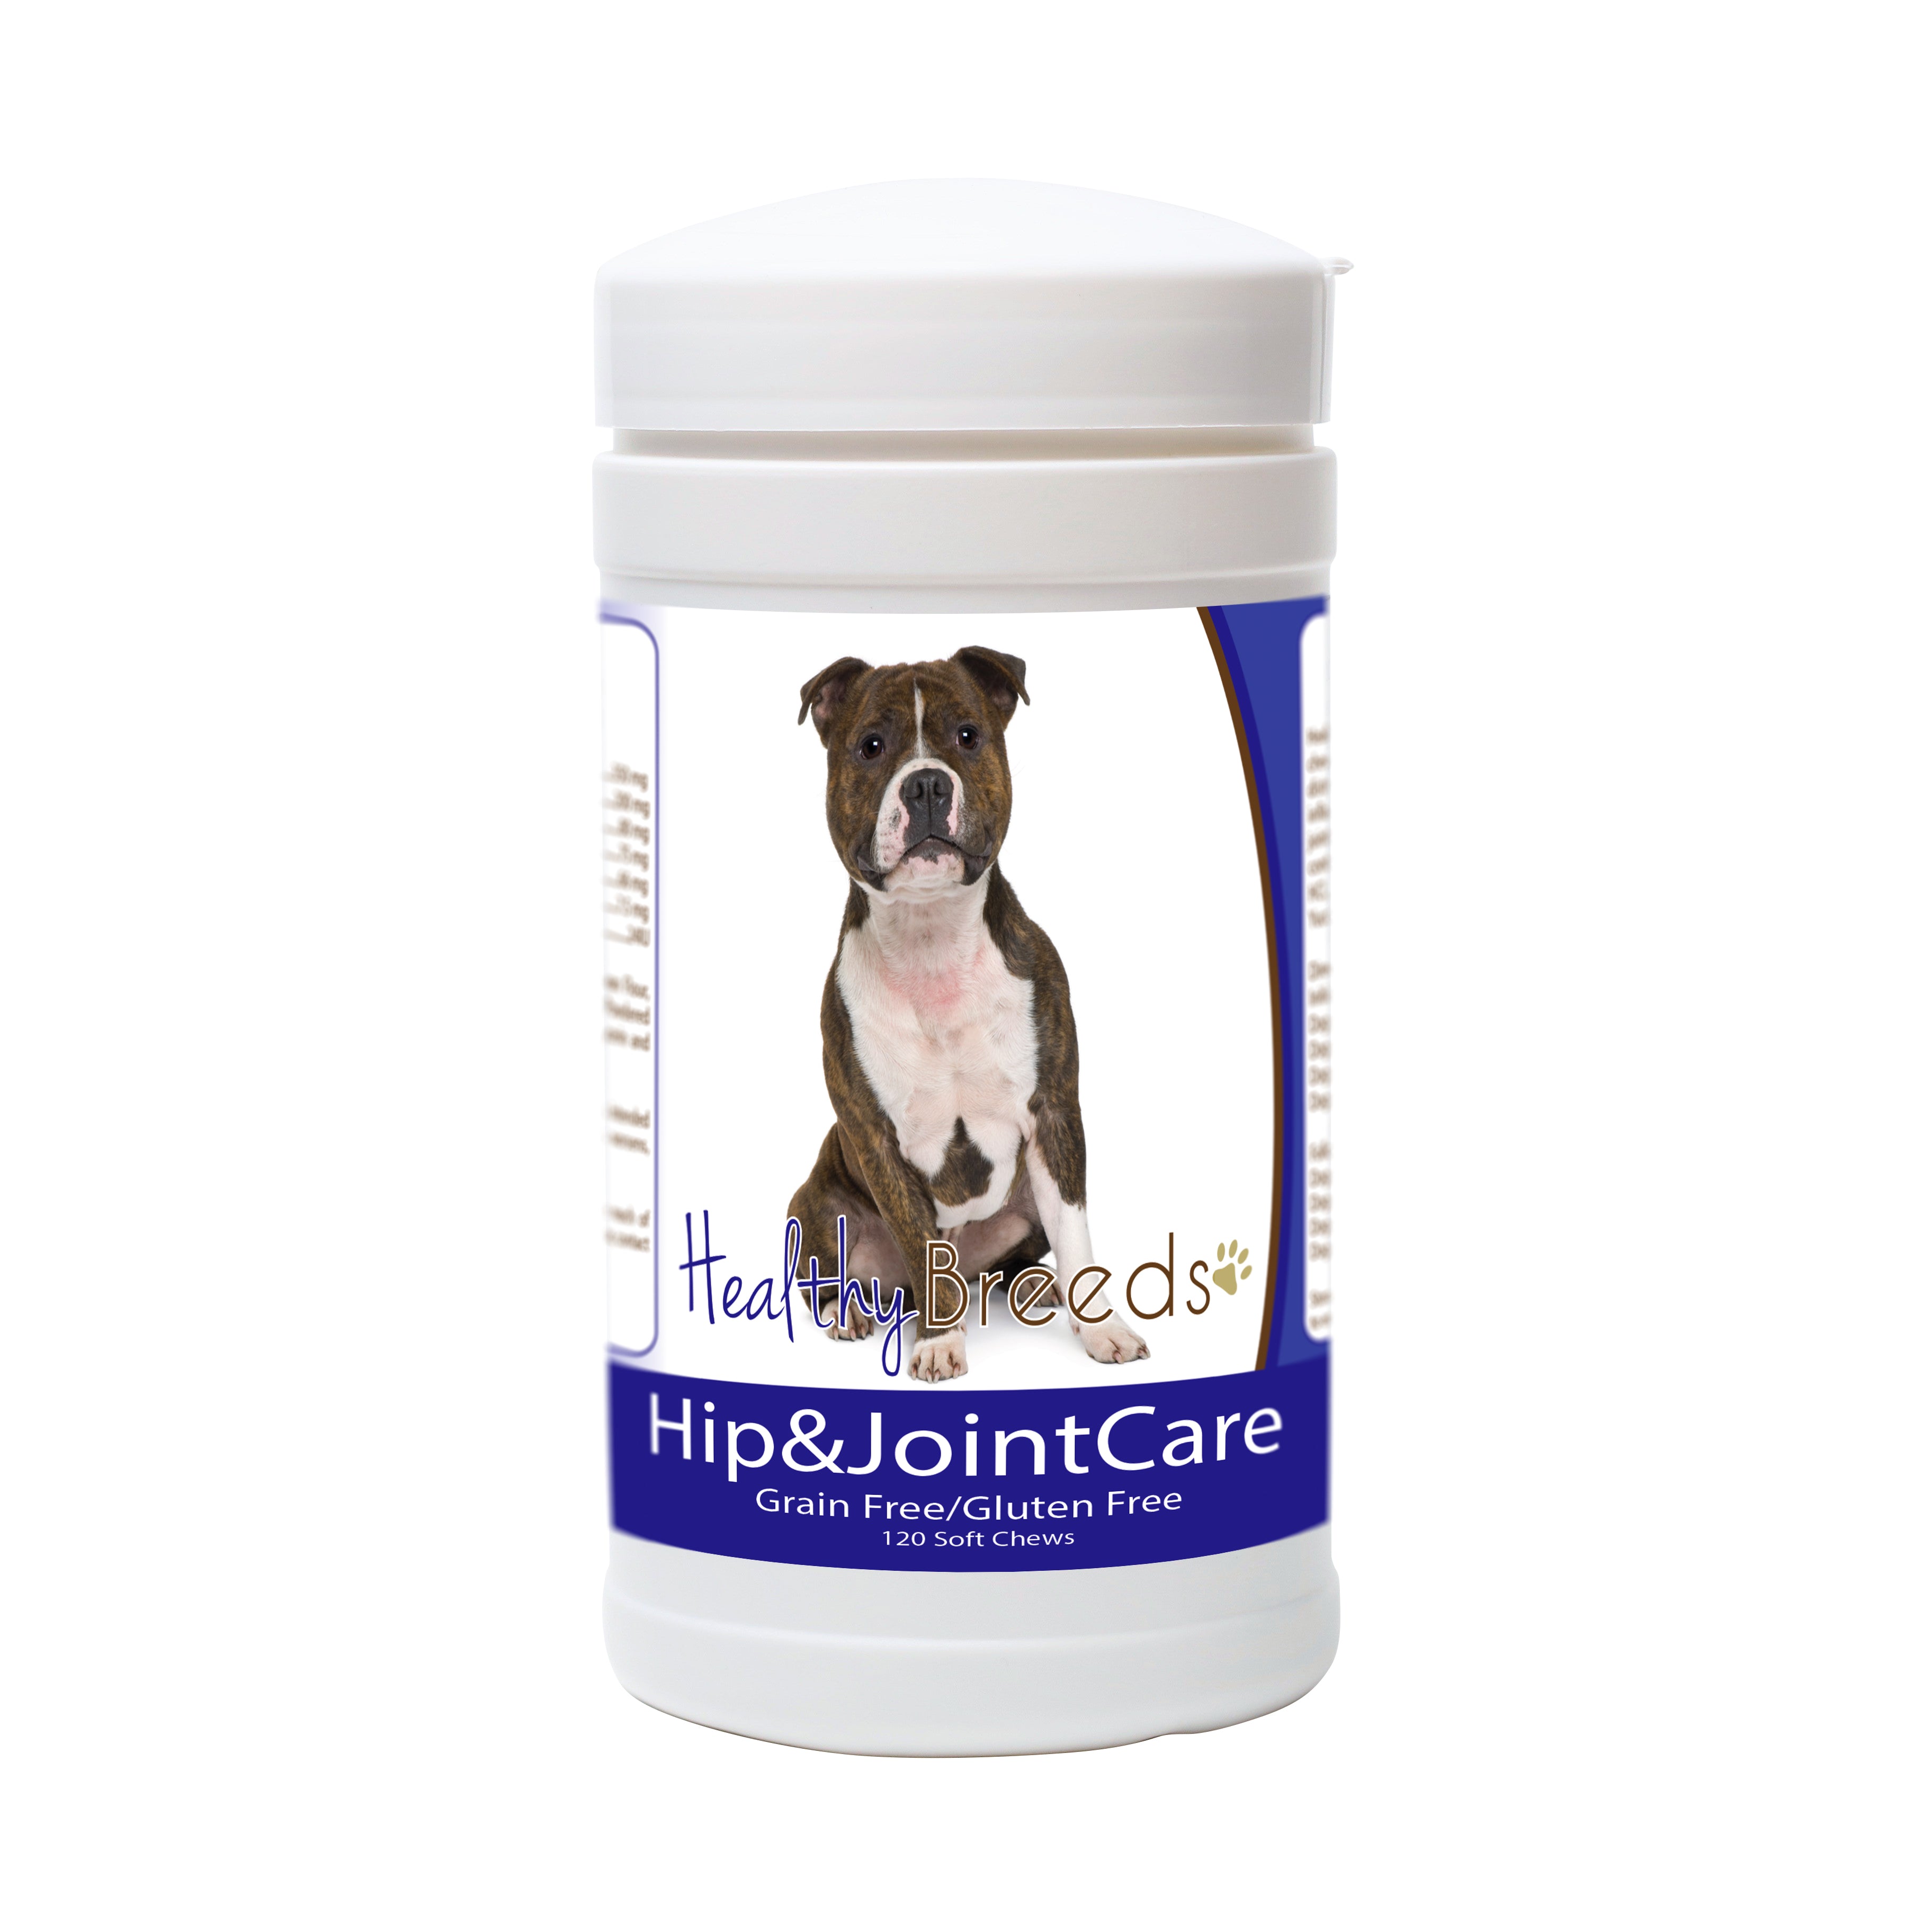 Staffordshire Bull Terrier Hip and Joint Care 120 Count